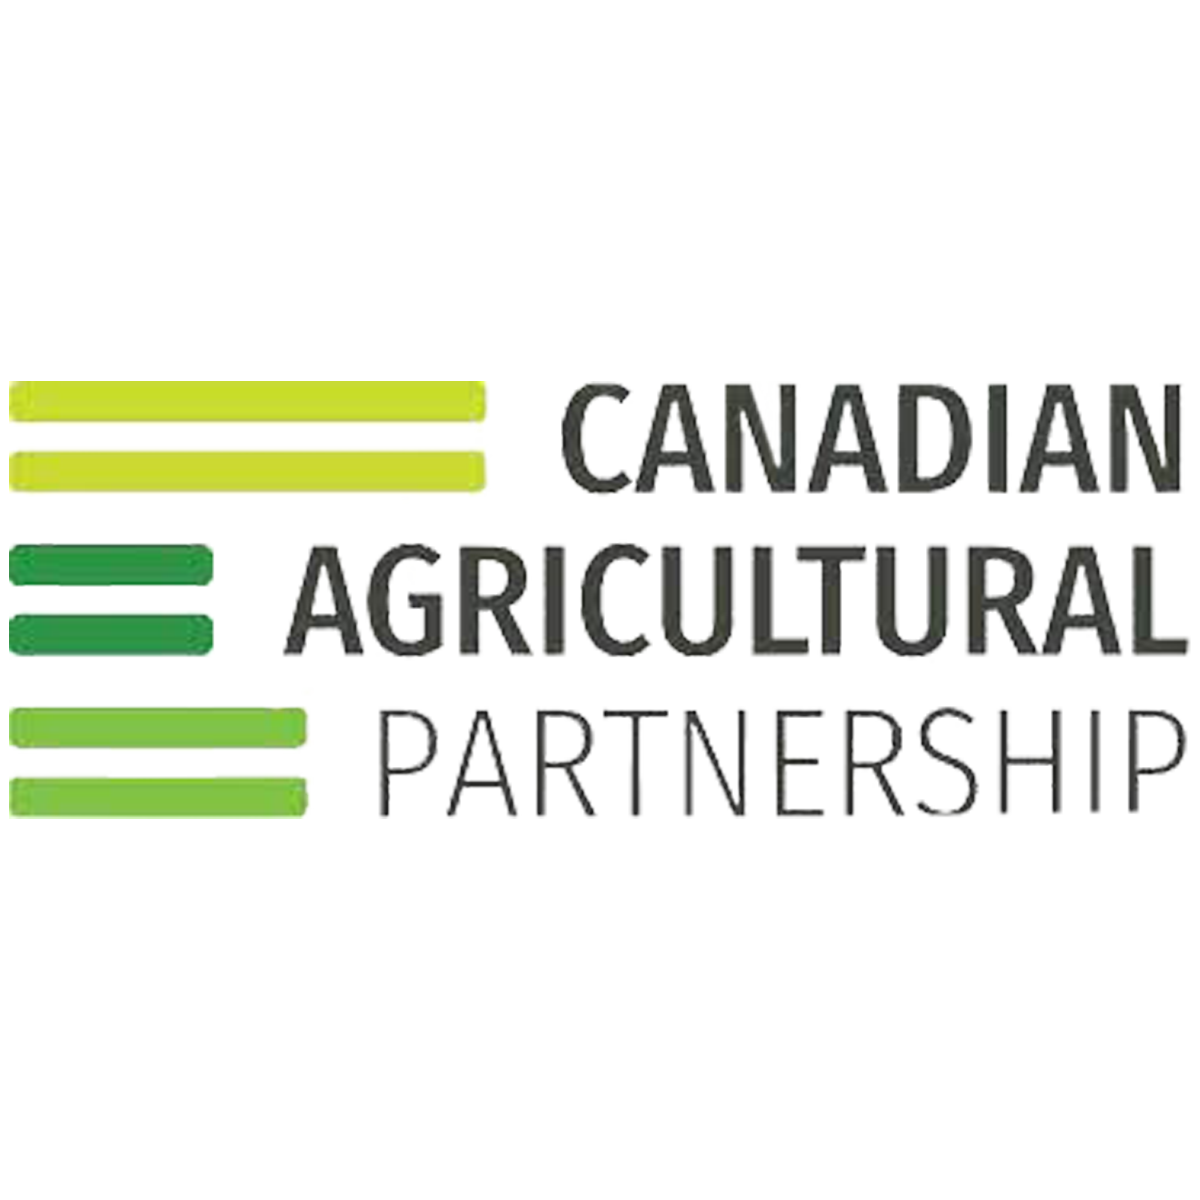 canadian agricultural partnership.png